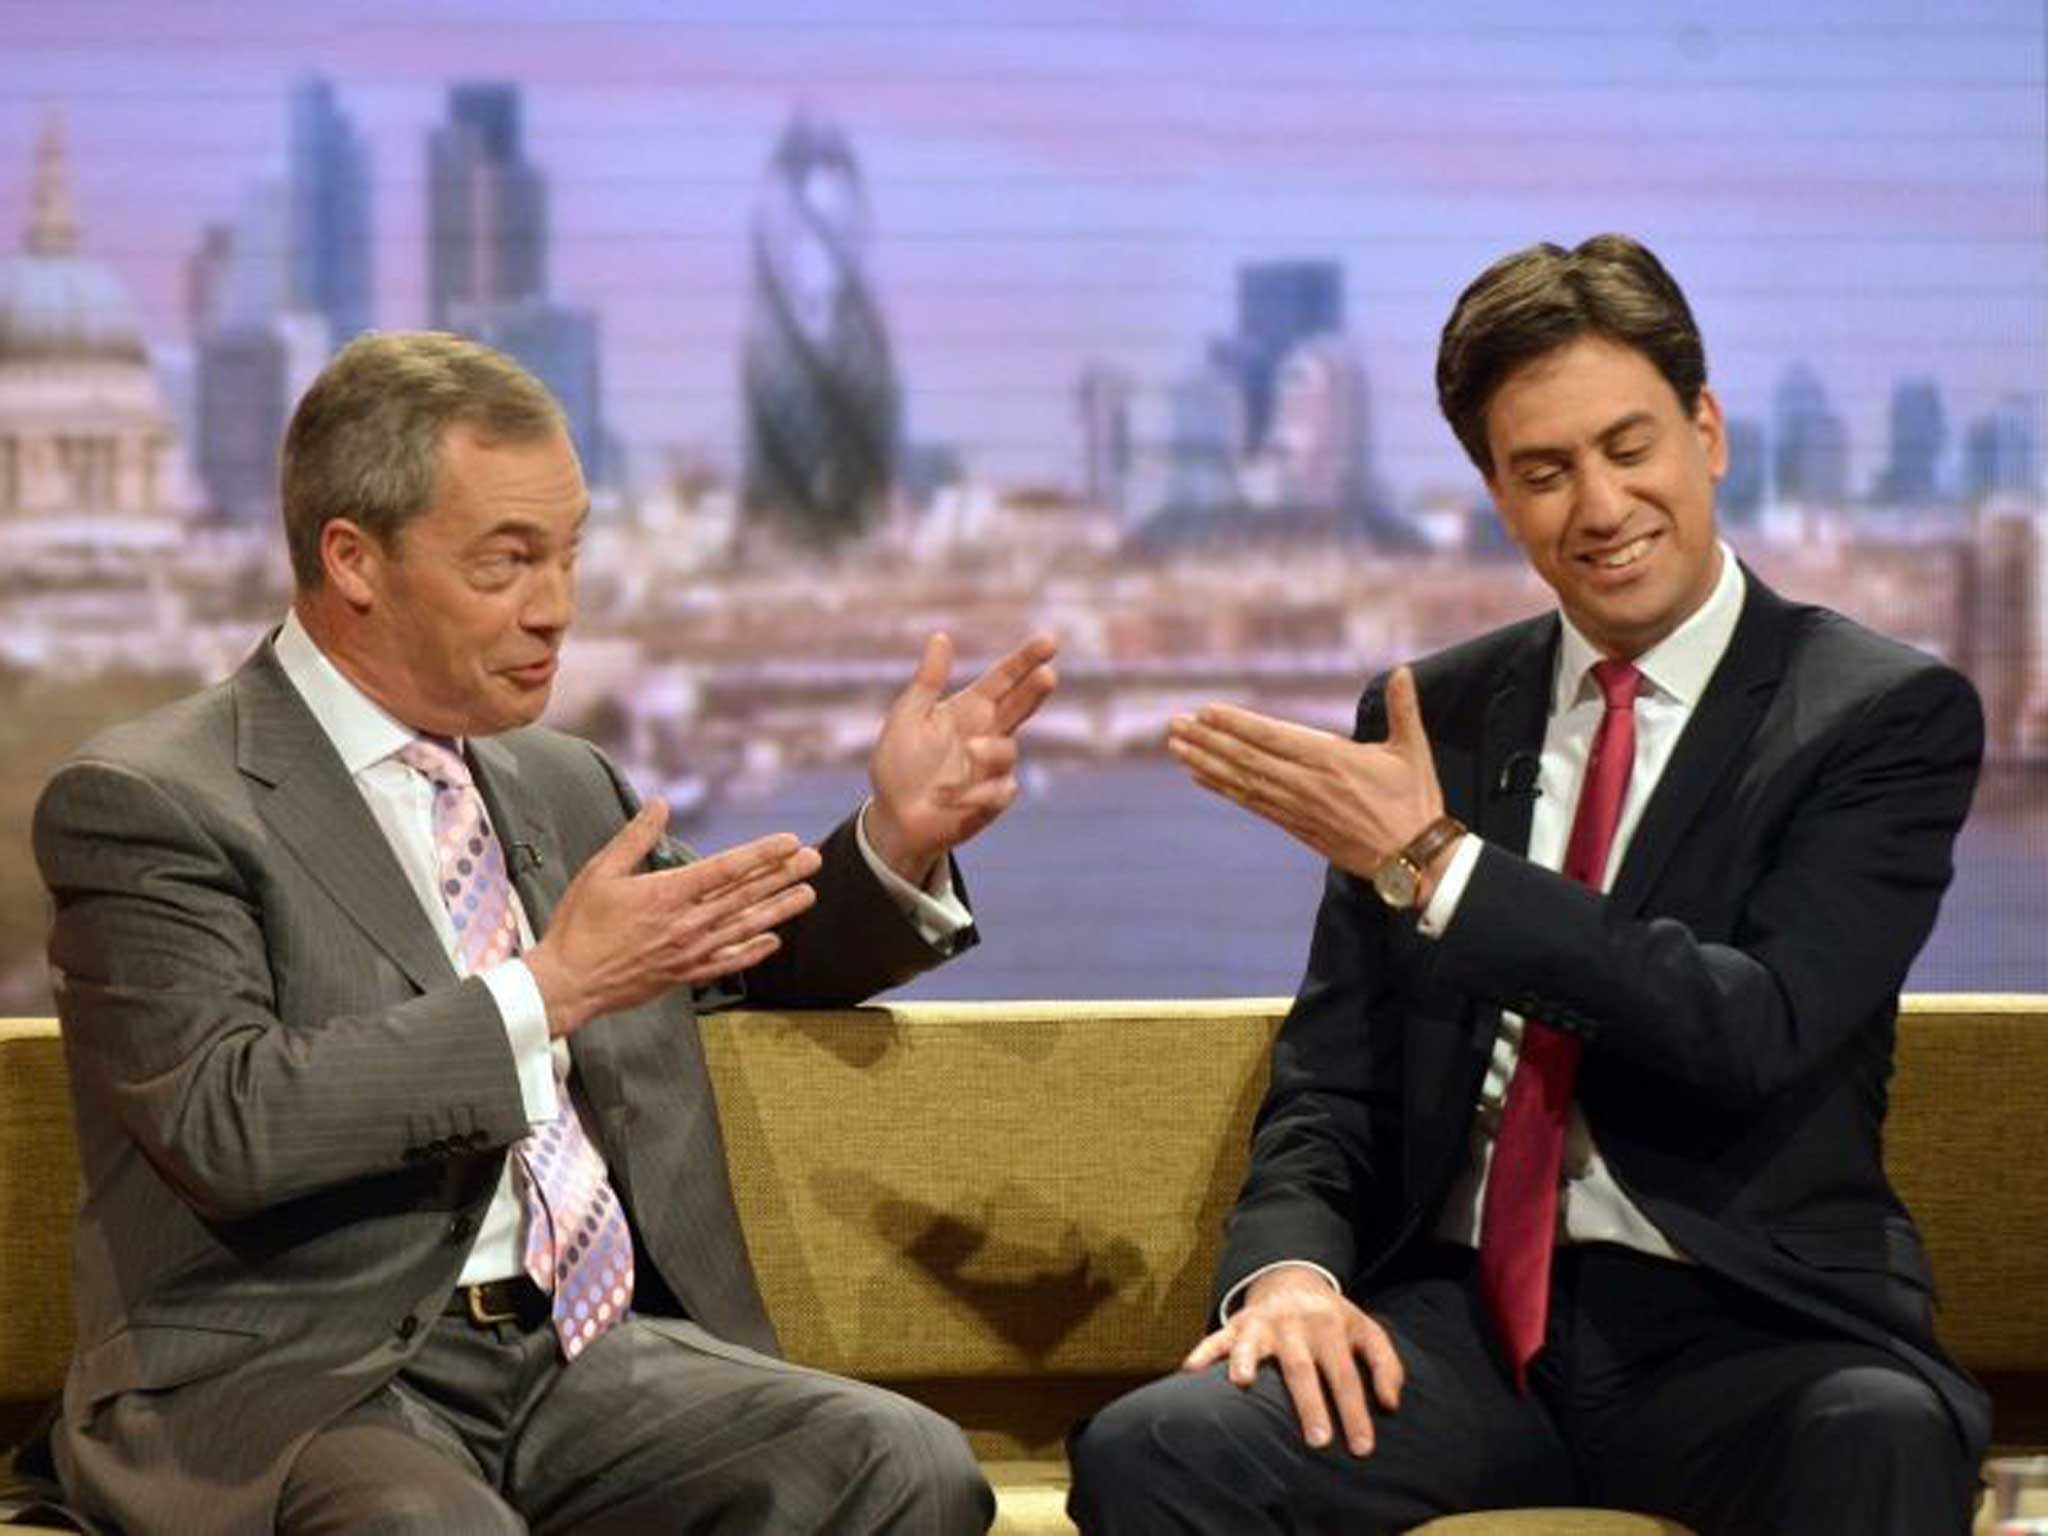 Nigel Farage challenged Ed Miliband to a debate ahead of those already agreed for the general election campaign